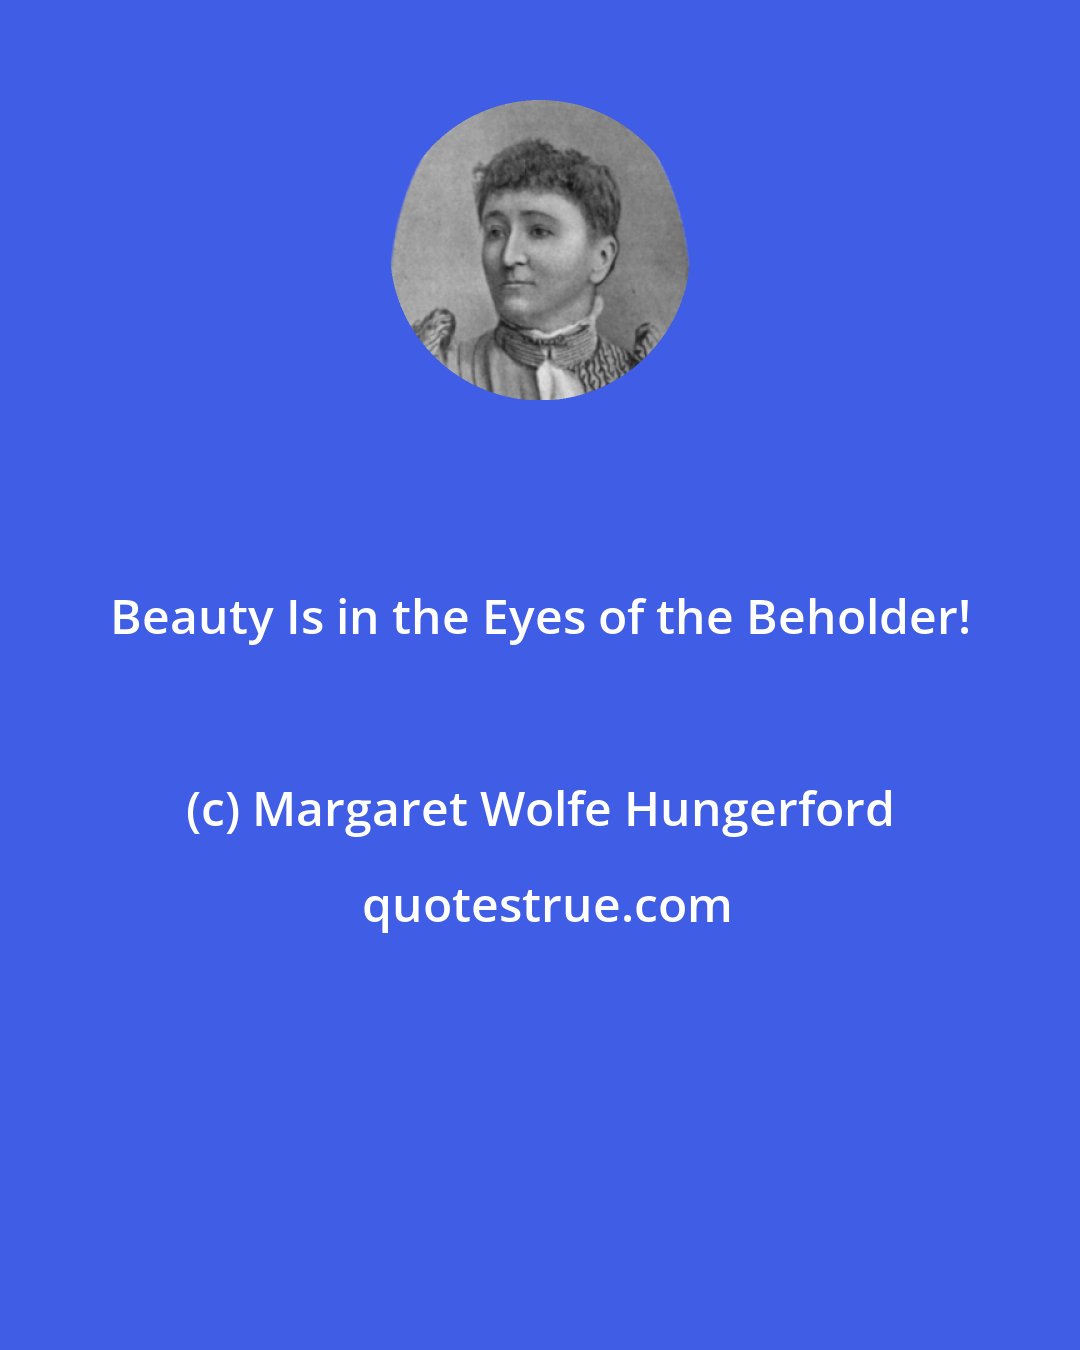 Margaret Wolfe Hungerford: Beauty Is in the Eyes of the Beholder!